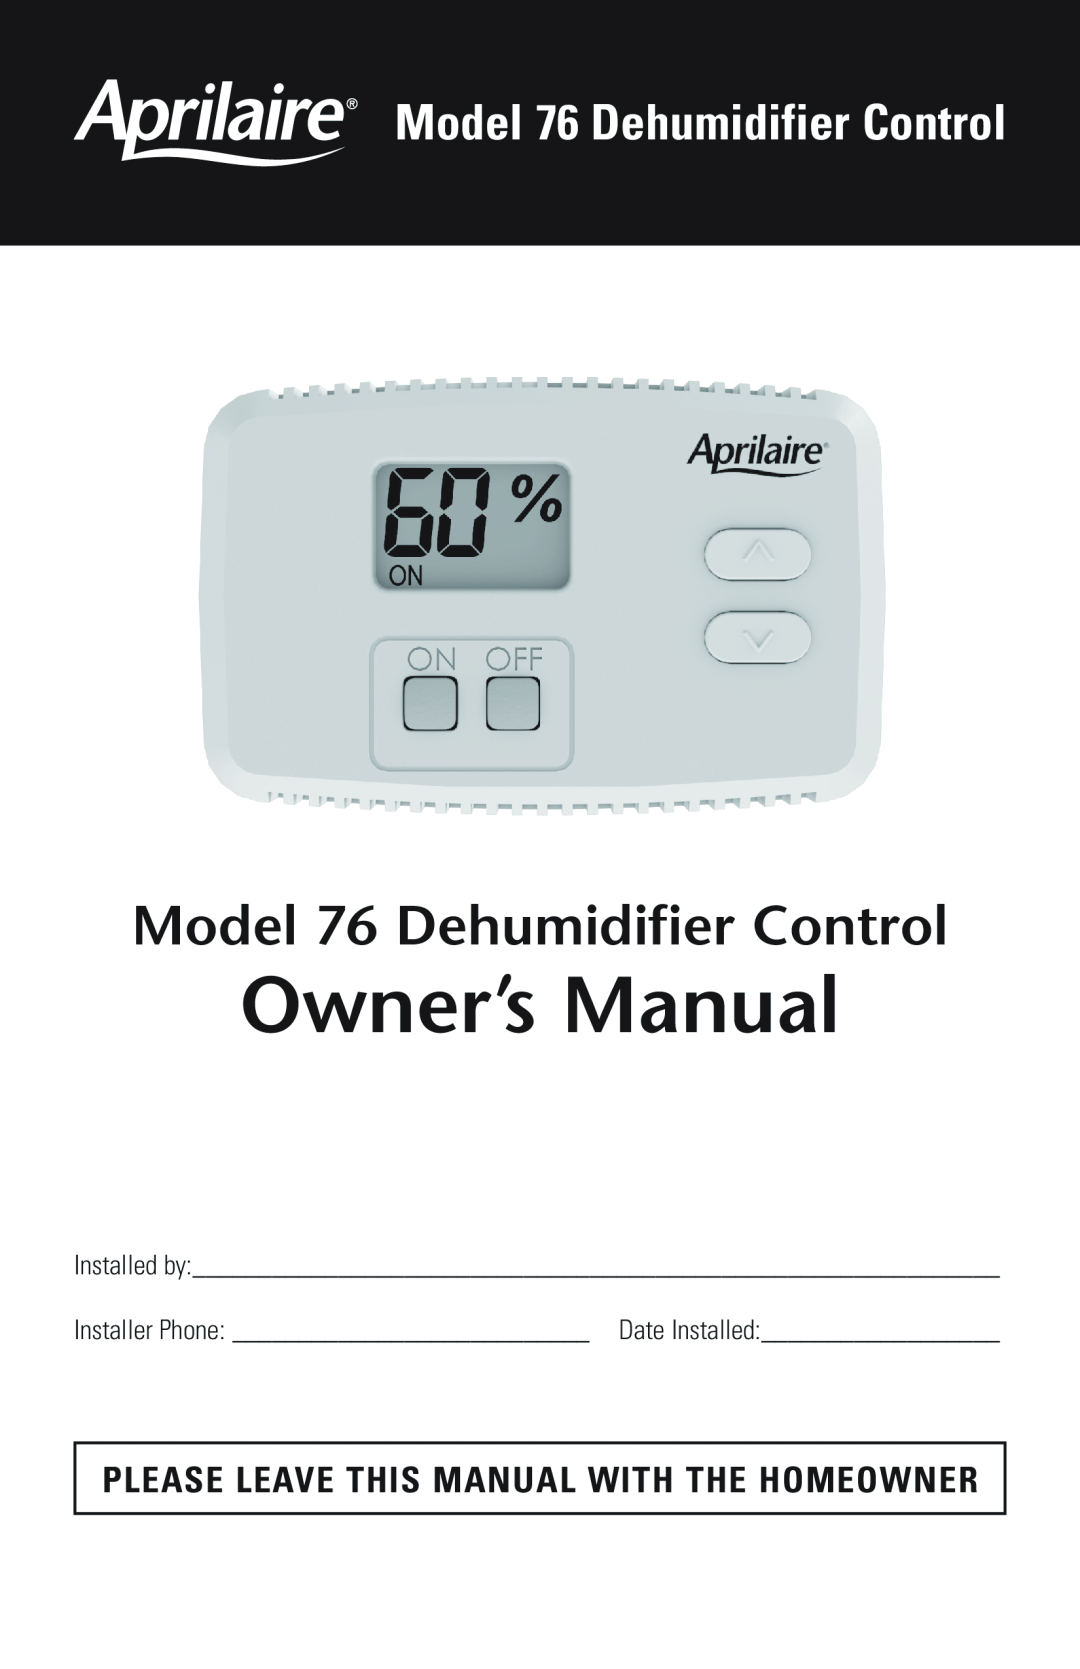 Aprilaire owner manual Model 76 Dehumidifier Control, Please Leave This Manual With The Homeowner 